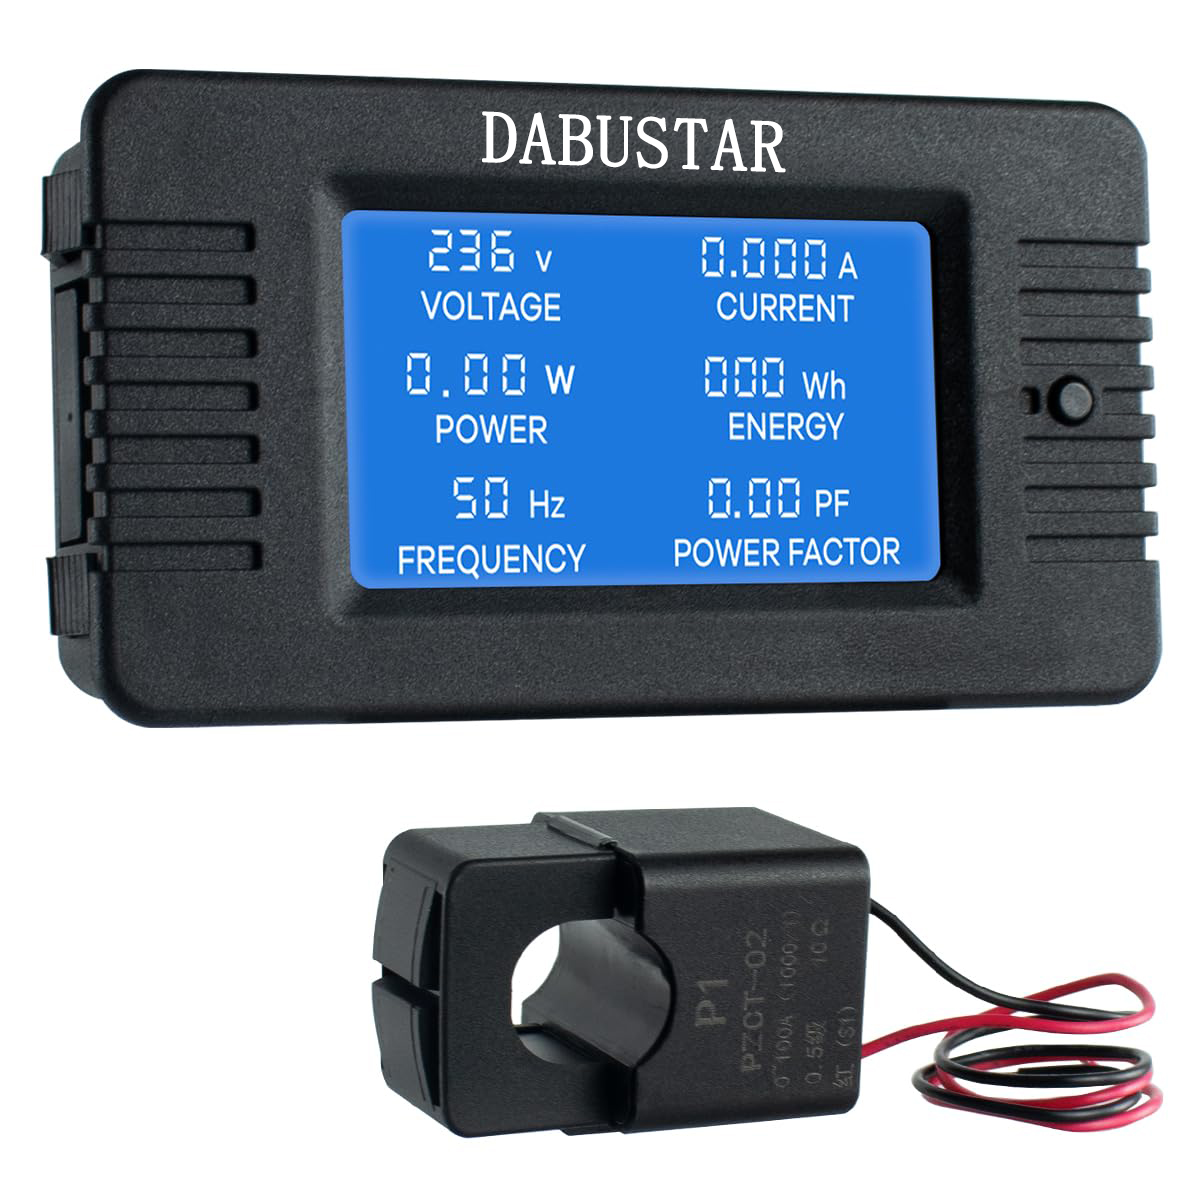 DABUSTAR Electronic monitors for monitoring flowmeters 80-260V 100A LCD Digital Display Multi-Function Power Monitor Voltage Current Frequency Power Factor Energy Meter Ammeter Voltmeter with Split Core Current Transformer